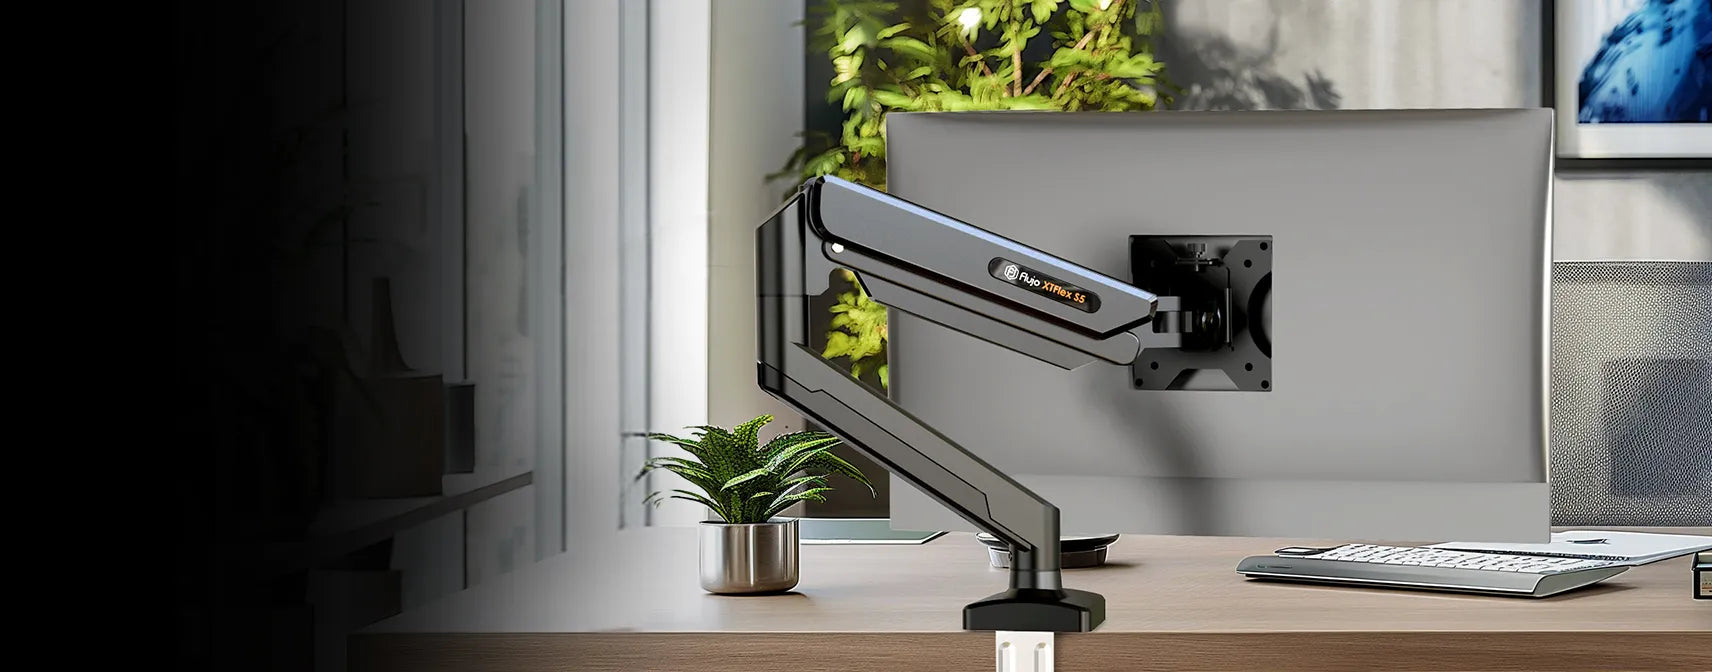 XTFlex S5 Single Monitor Arm mounted on a standing desk for ergonomic workspace in Singapore